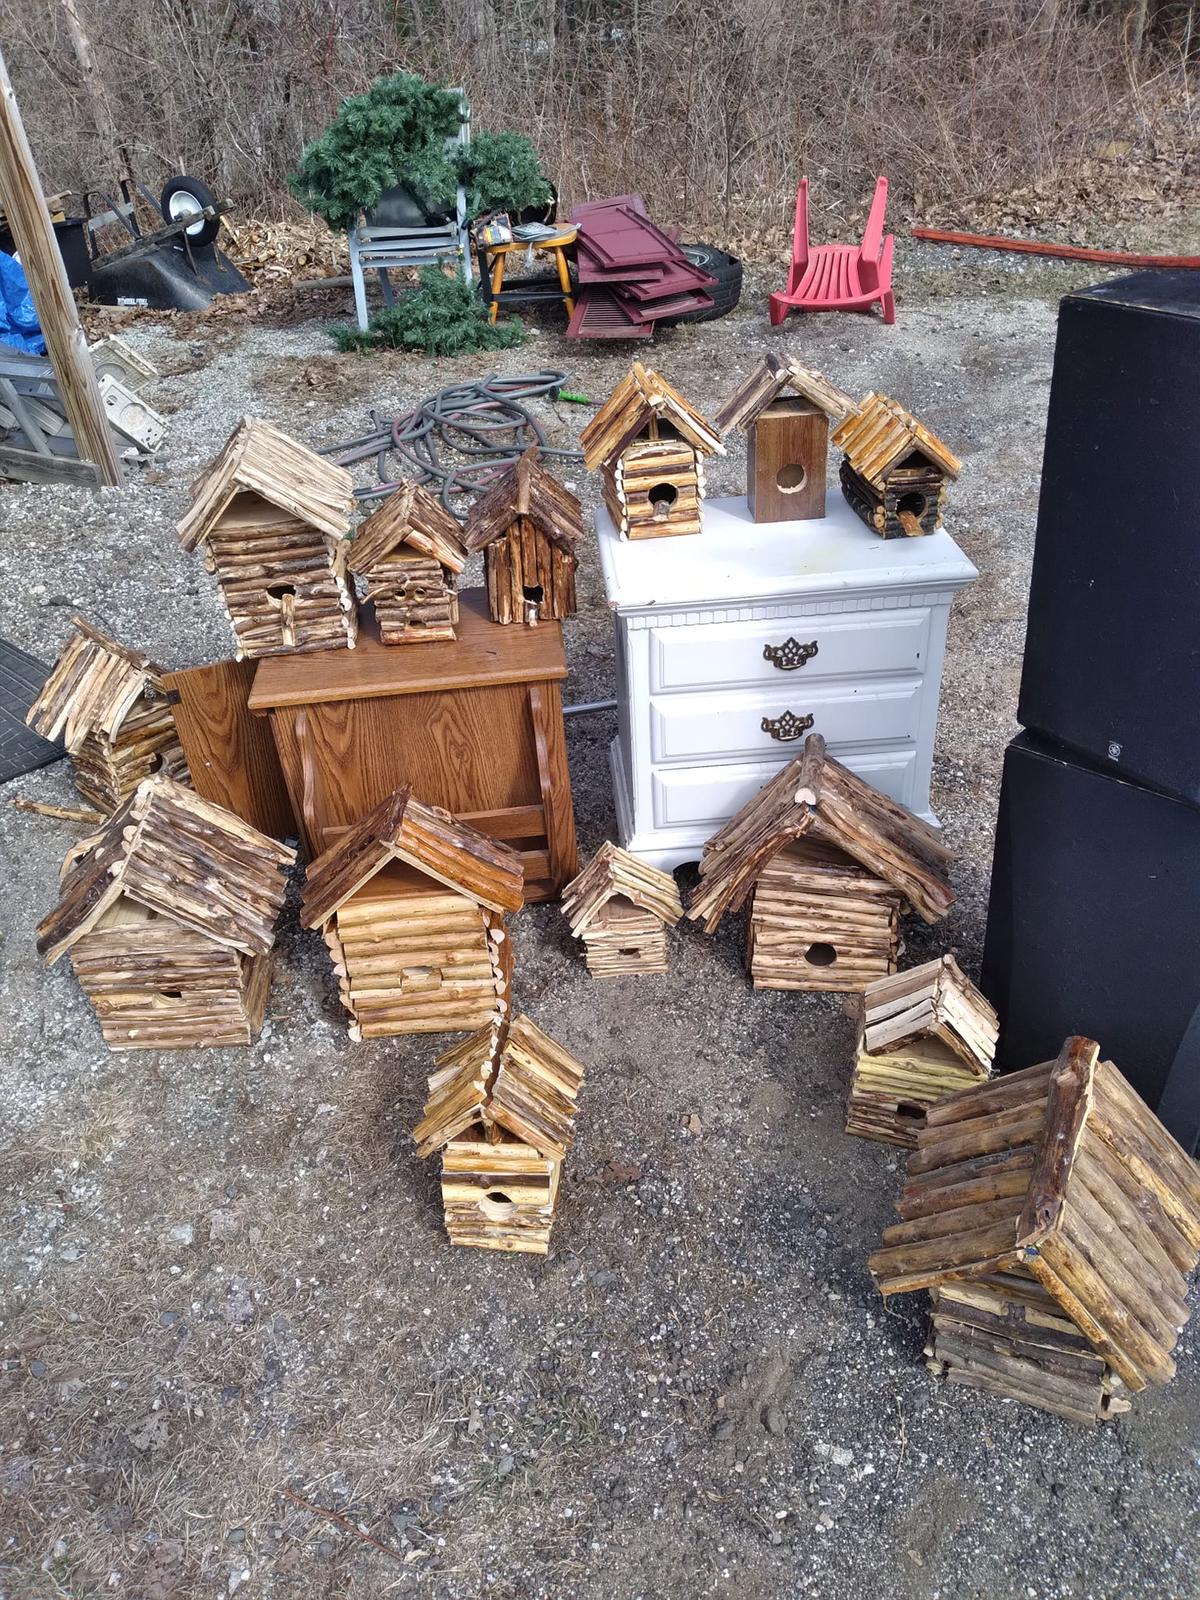 Frazier's handcrafted birdhouses, mailboxes, and more. (Courtesy of Trevor Michaud)